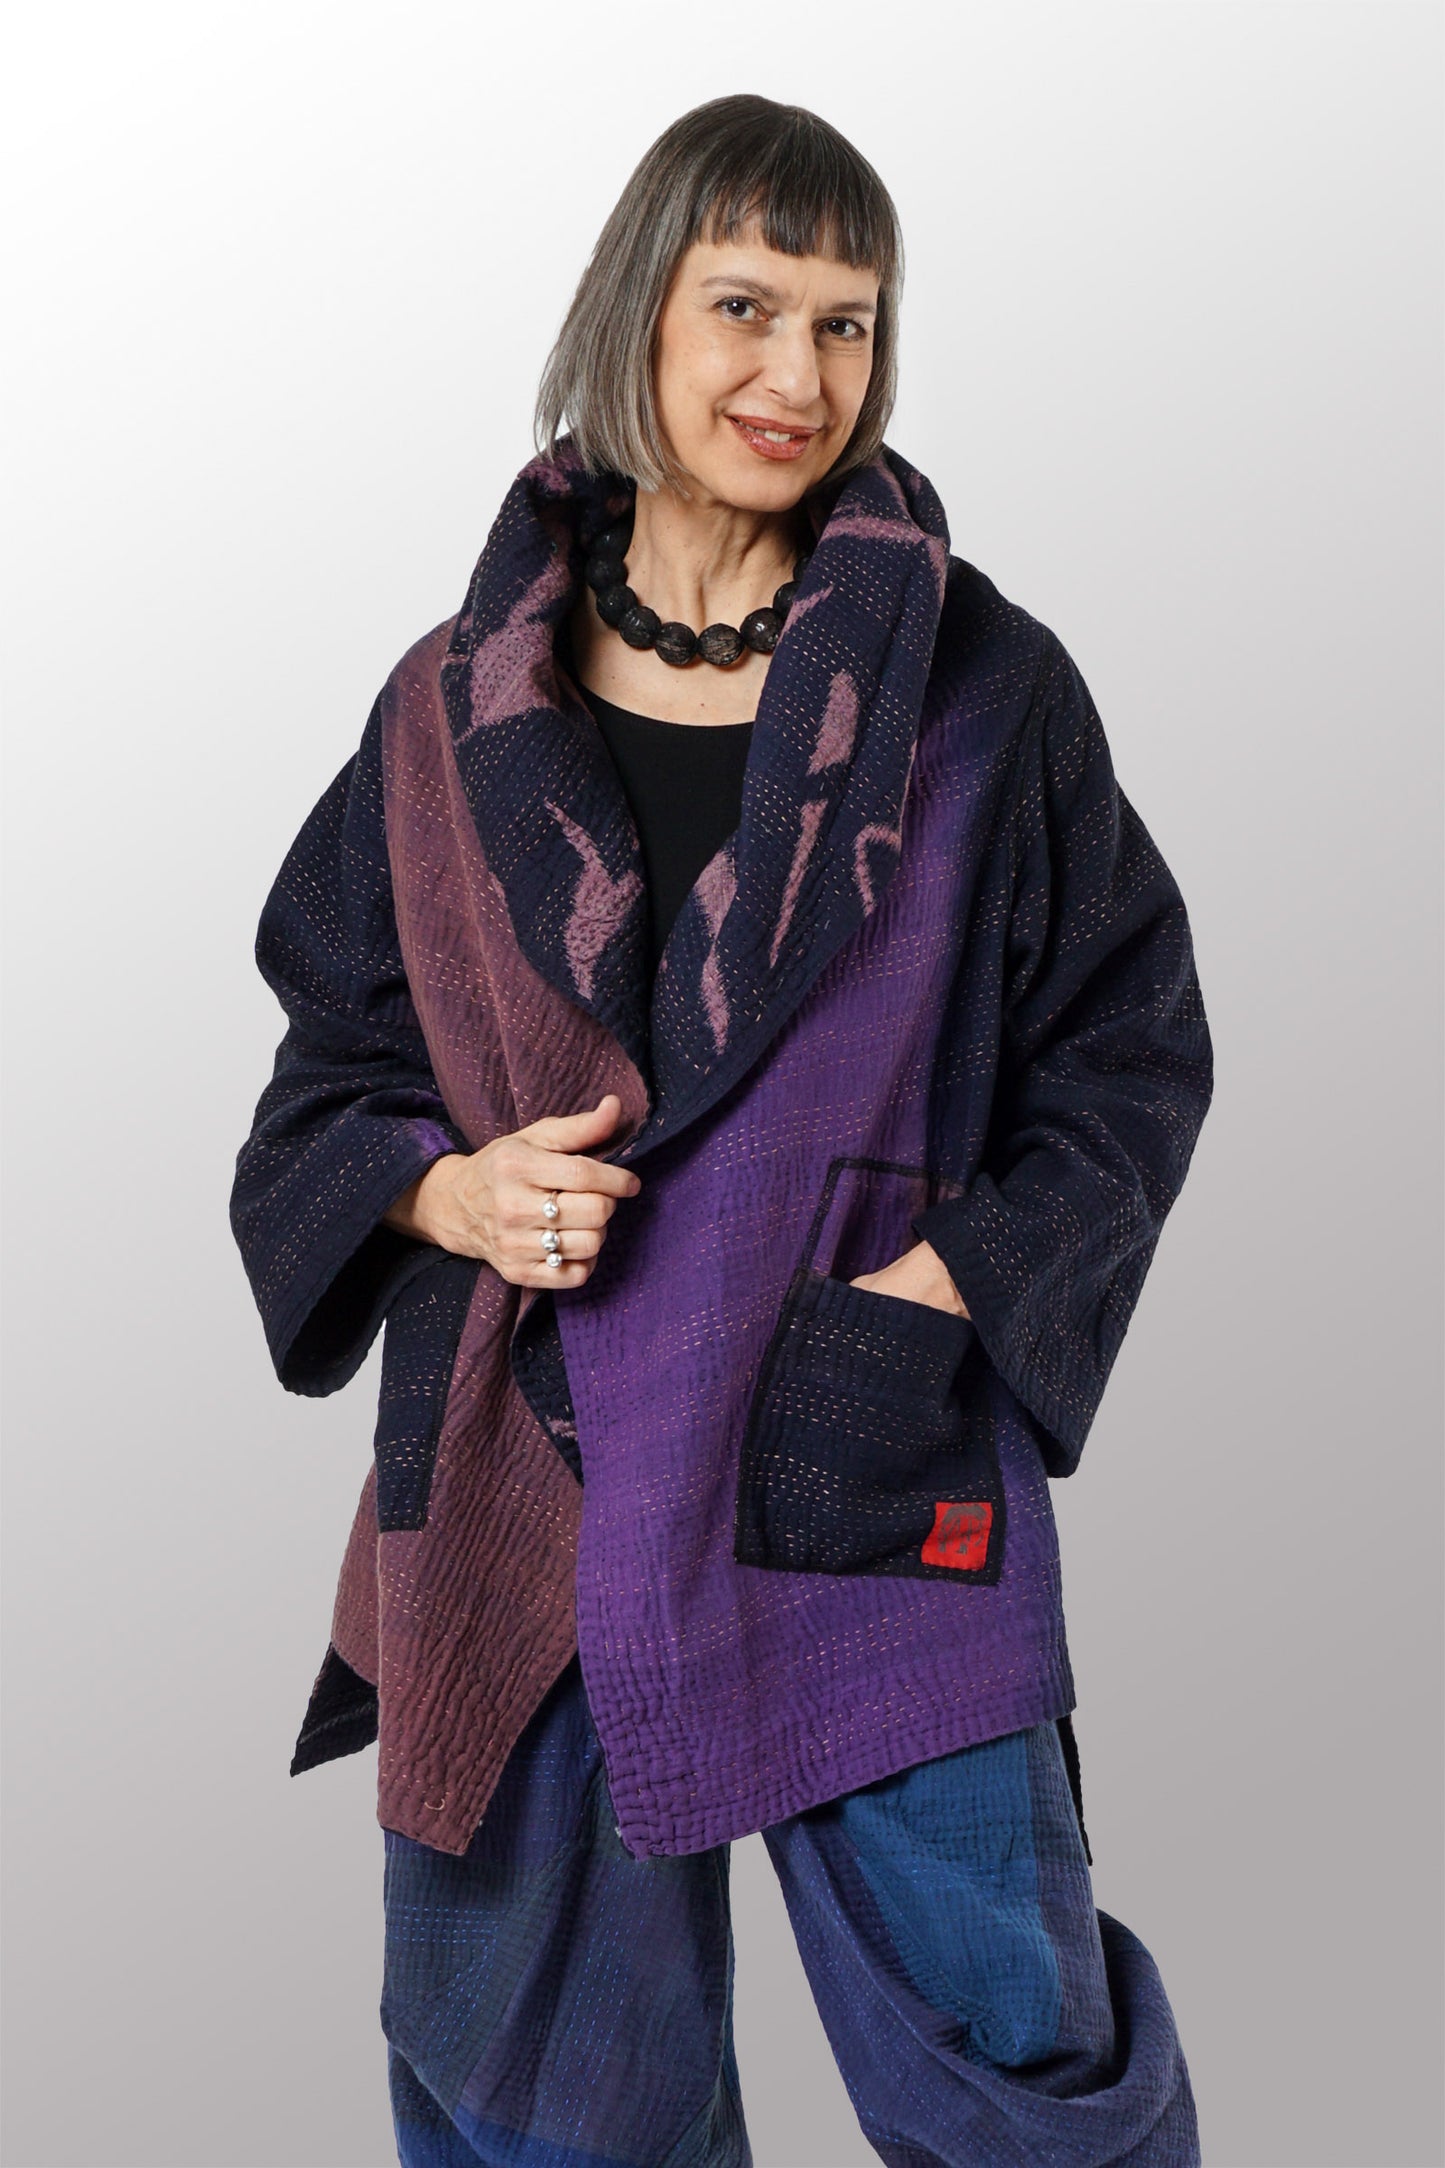 WOVEN HANDLOOM IKAT WITH OMBRE KANTHA HOODED A-LINE COAT - wh4341-prp -